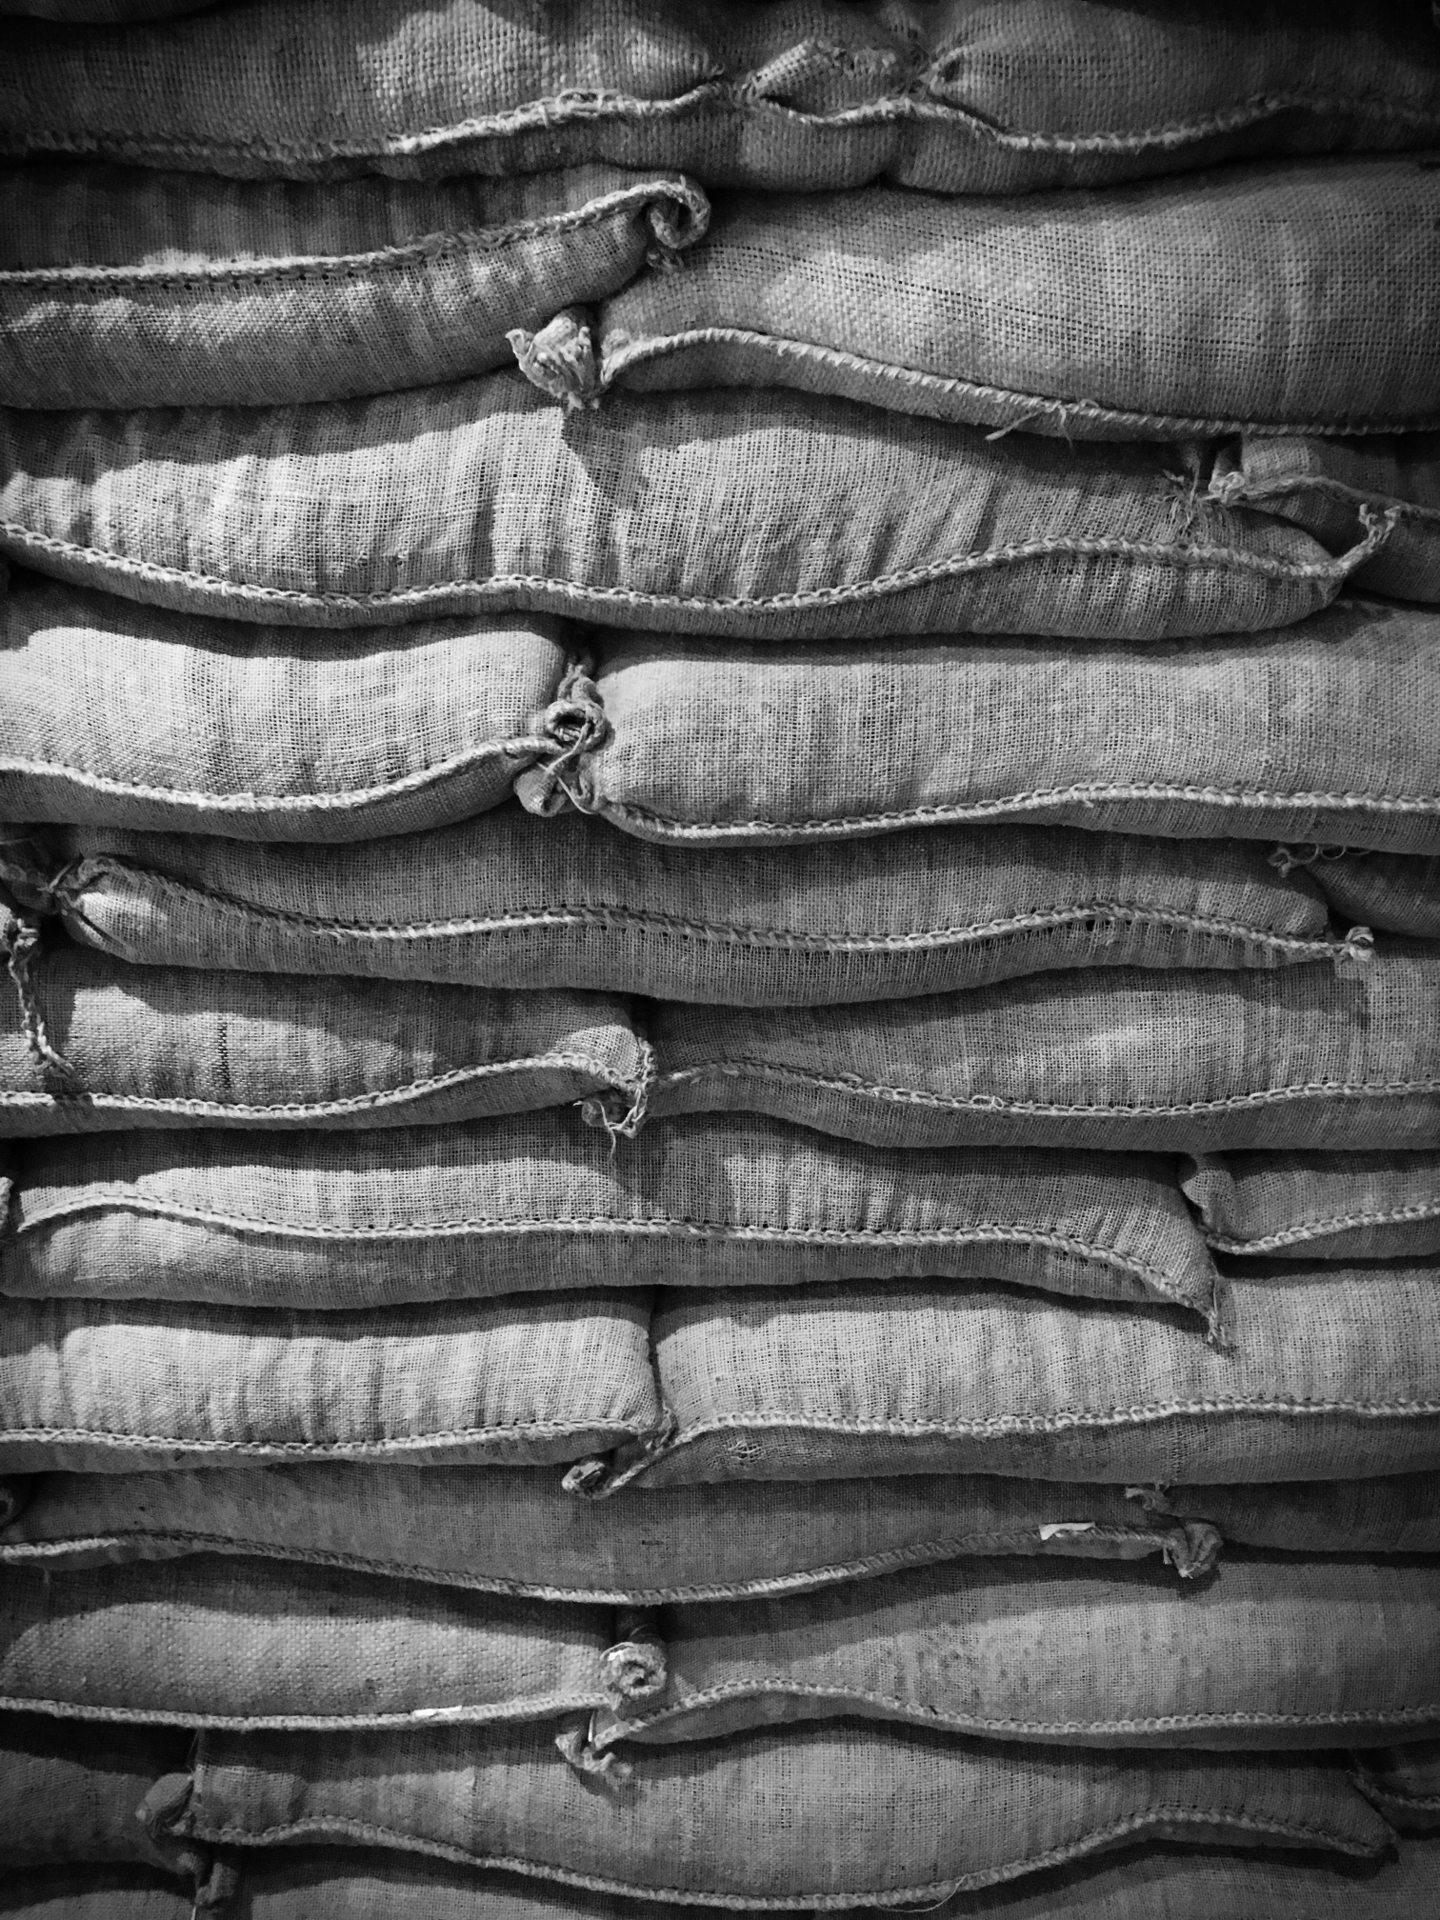 Sacks of coffee stacked up on atop another